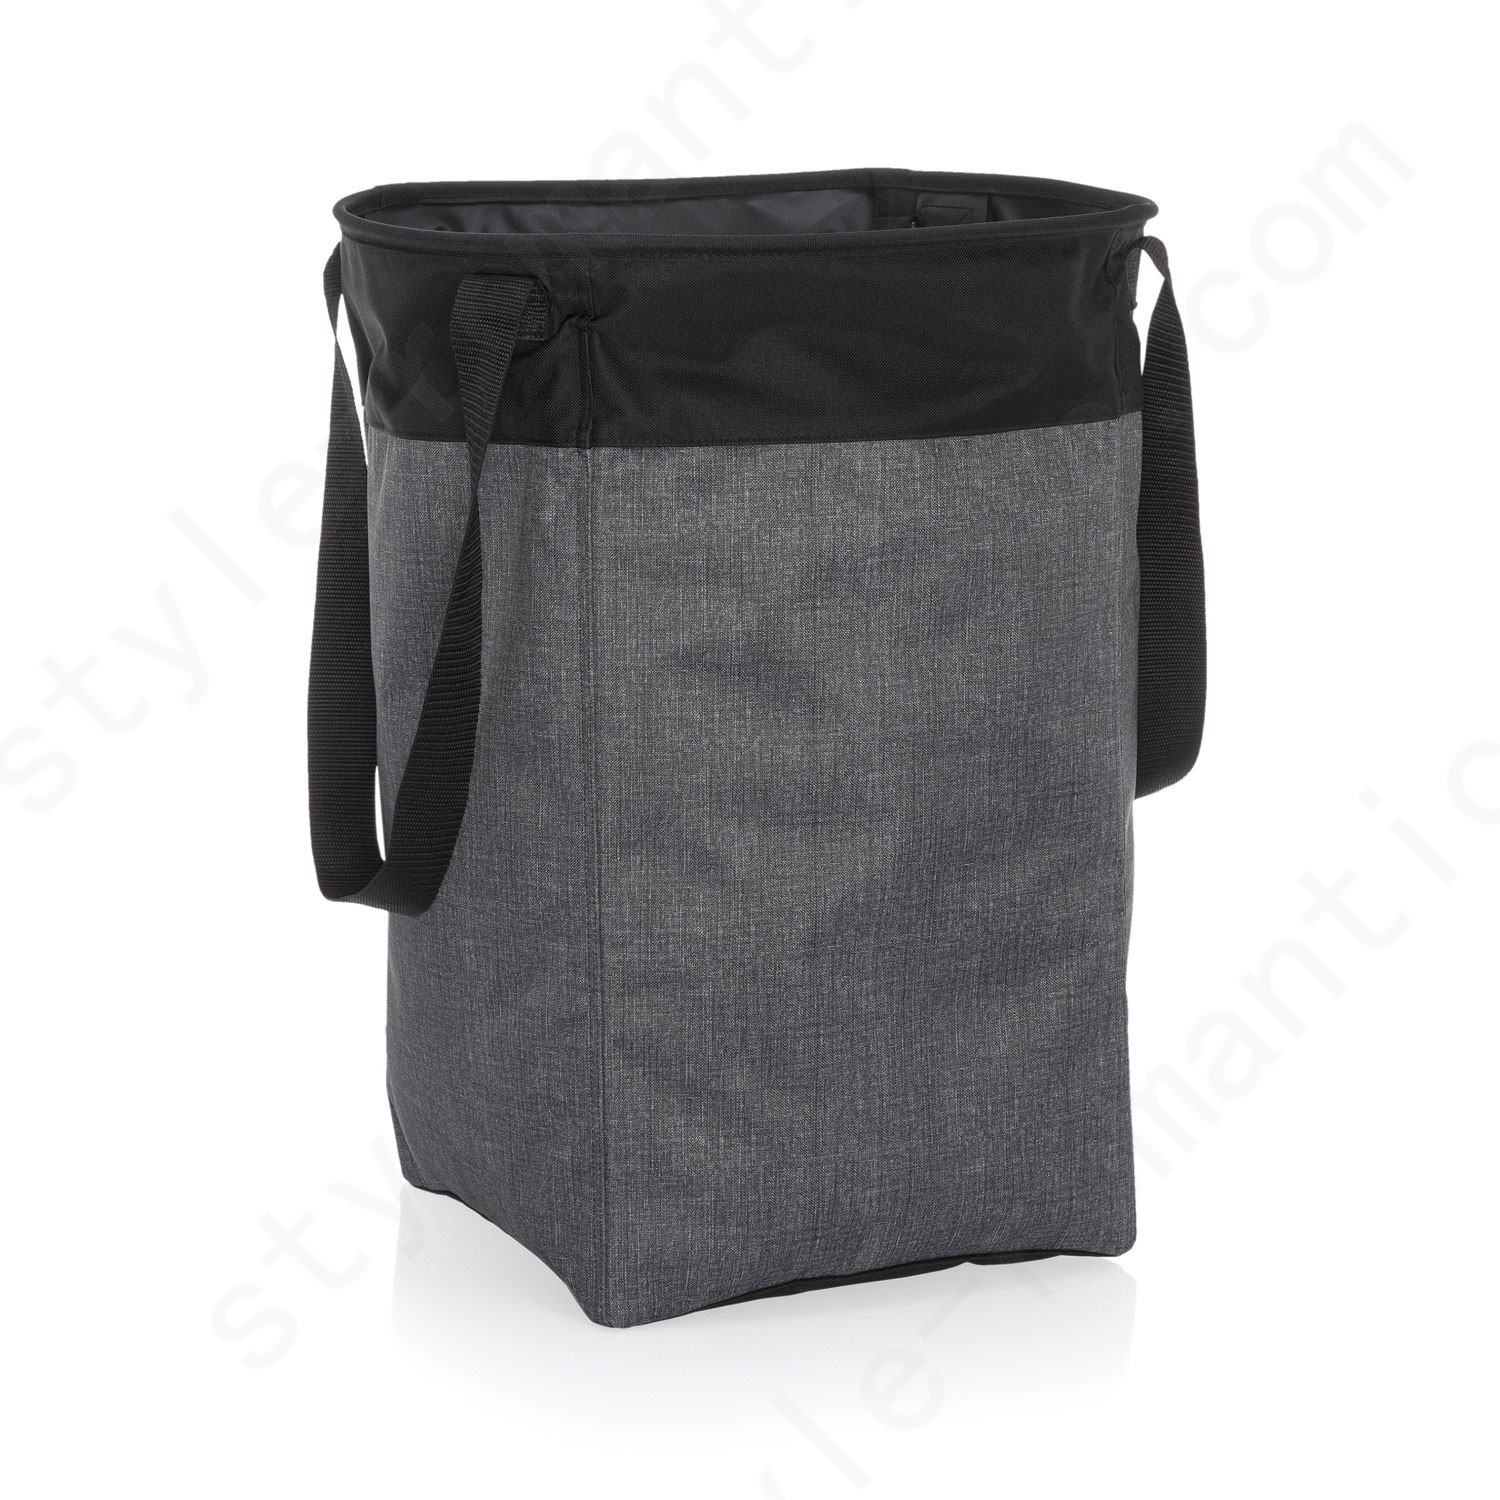 Thirty-One Gifts Stand Tall Bin - Charcoal Crosshatch - Thirty-One Gifts Stand Tall Bin - Charcoal Crosshatch